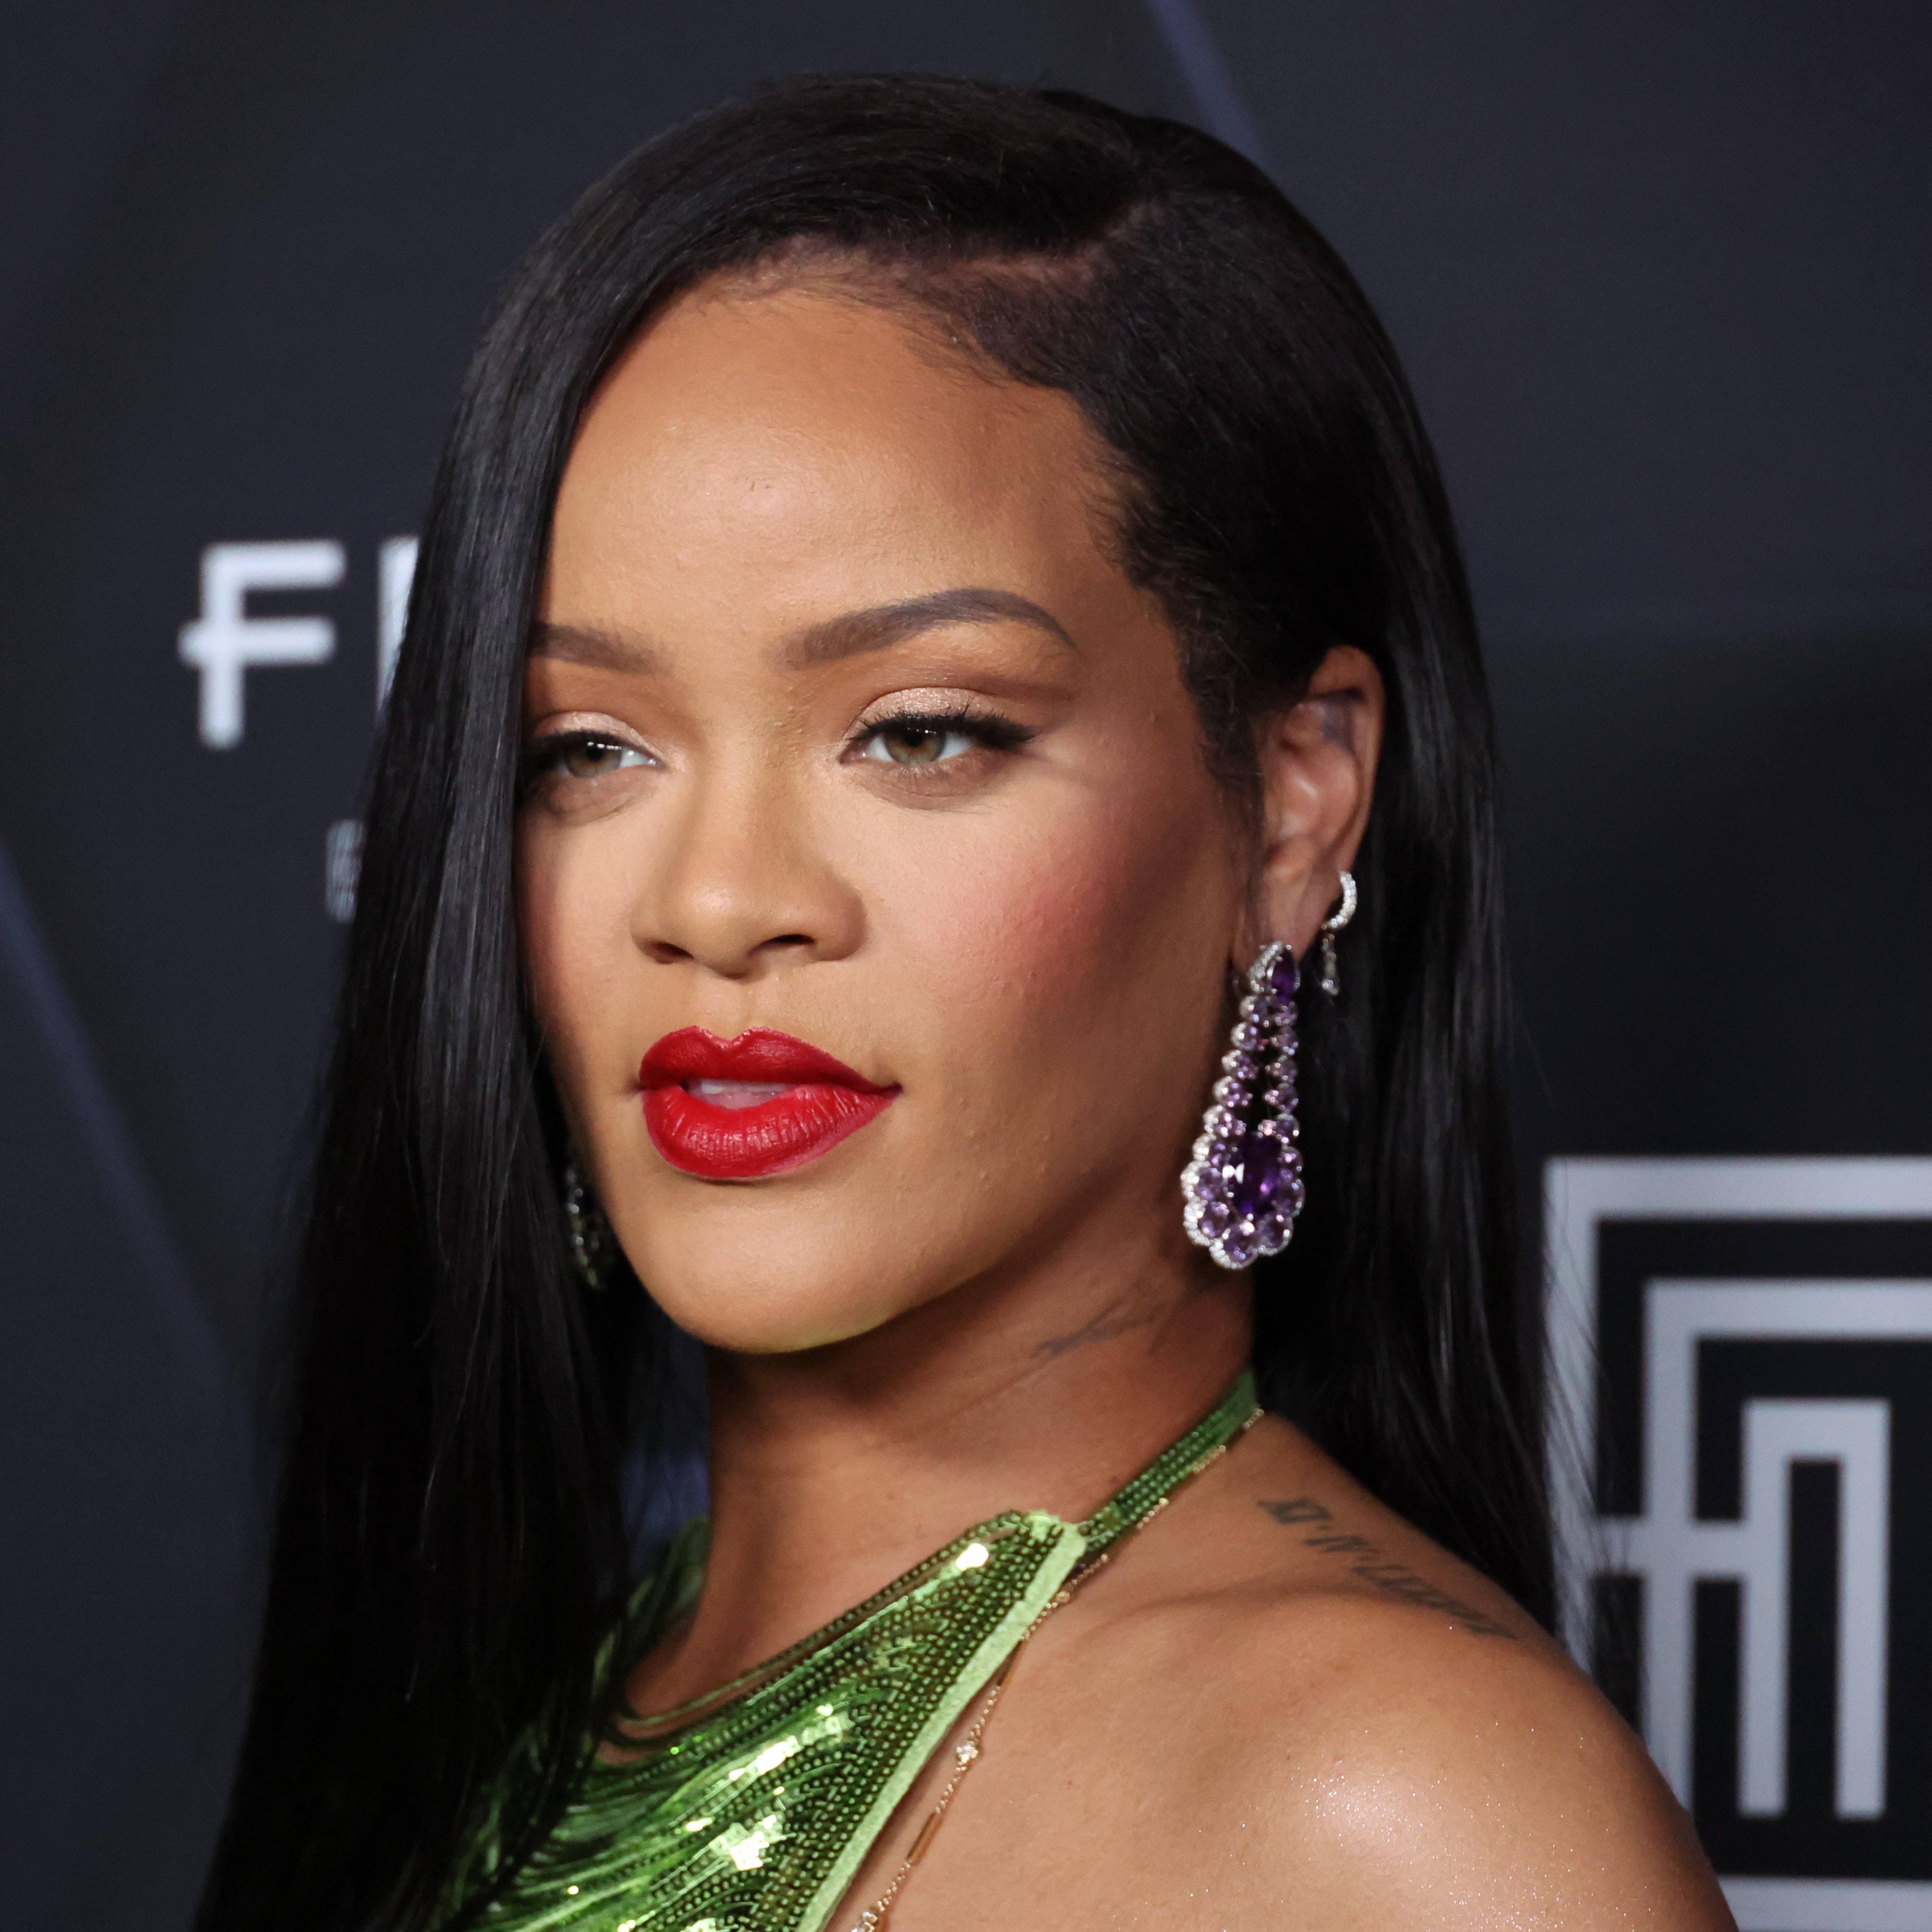 Rihanna Announced Her Super Bowl Performance With a Surprisingly Short Manicure